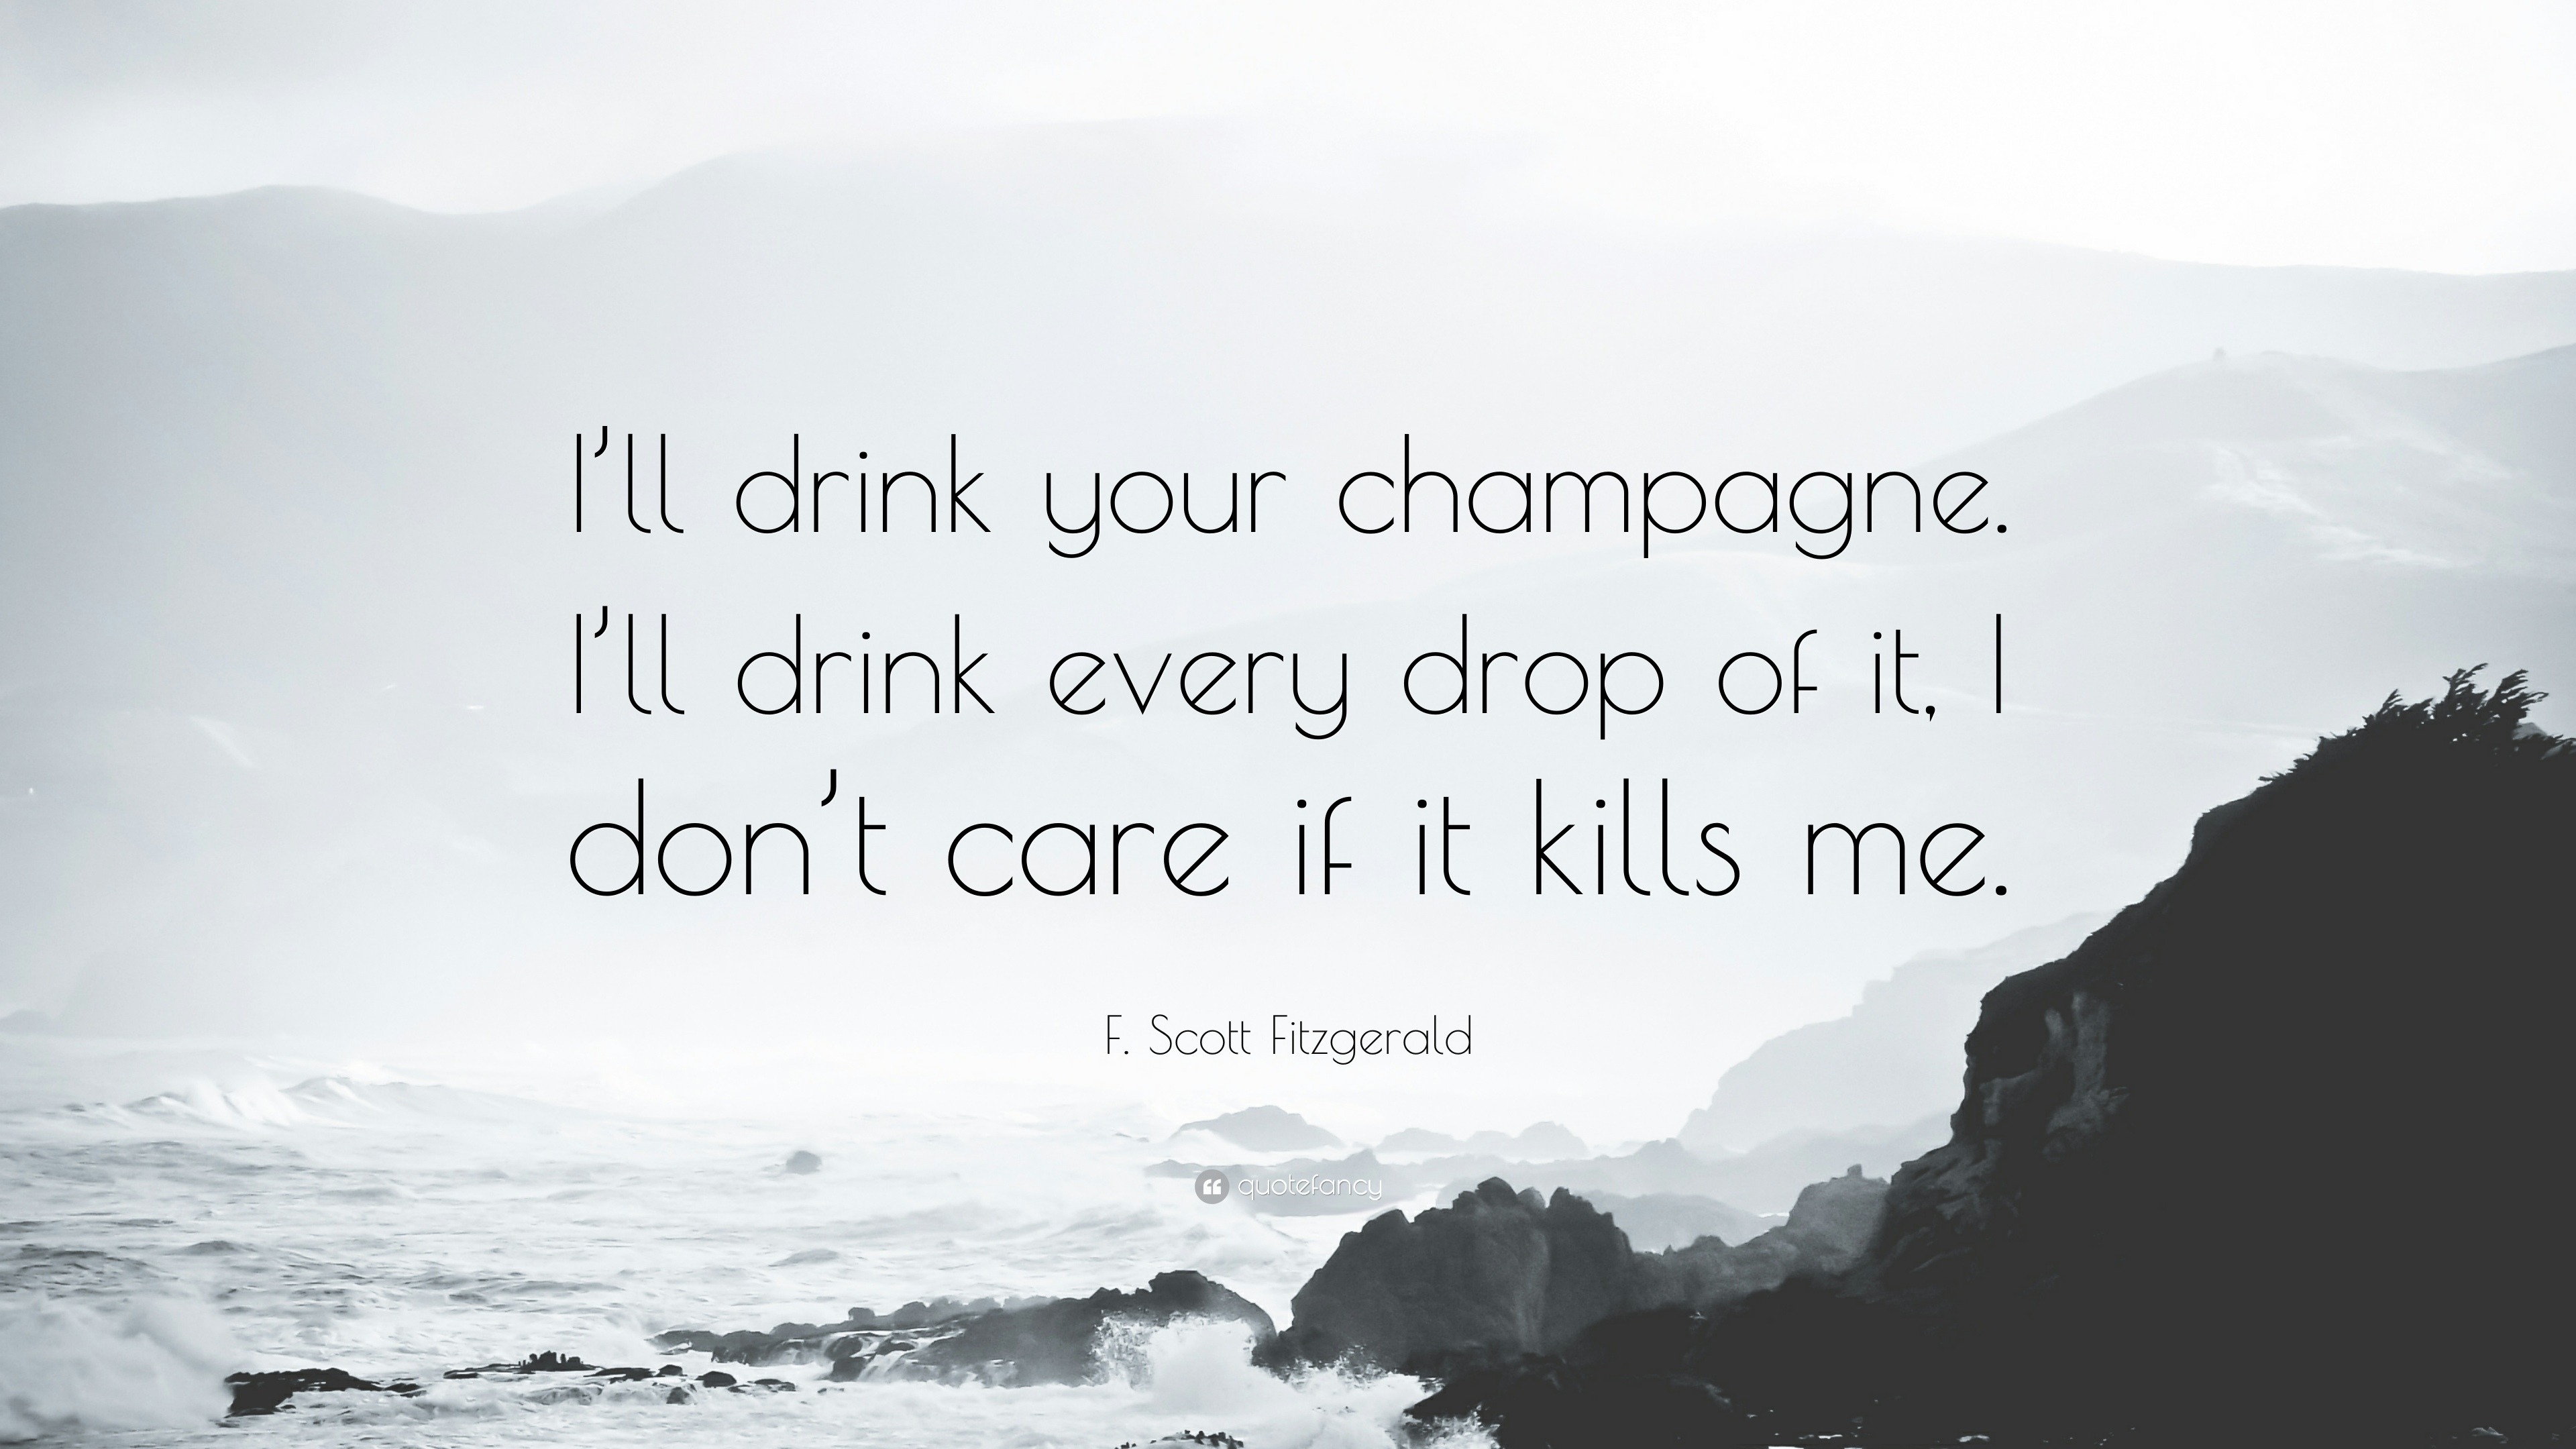 F. Scott Fitzgerald Quote: “I’ll drink your champagne. I’ll drink every ...